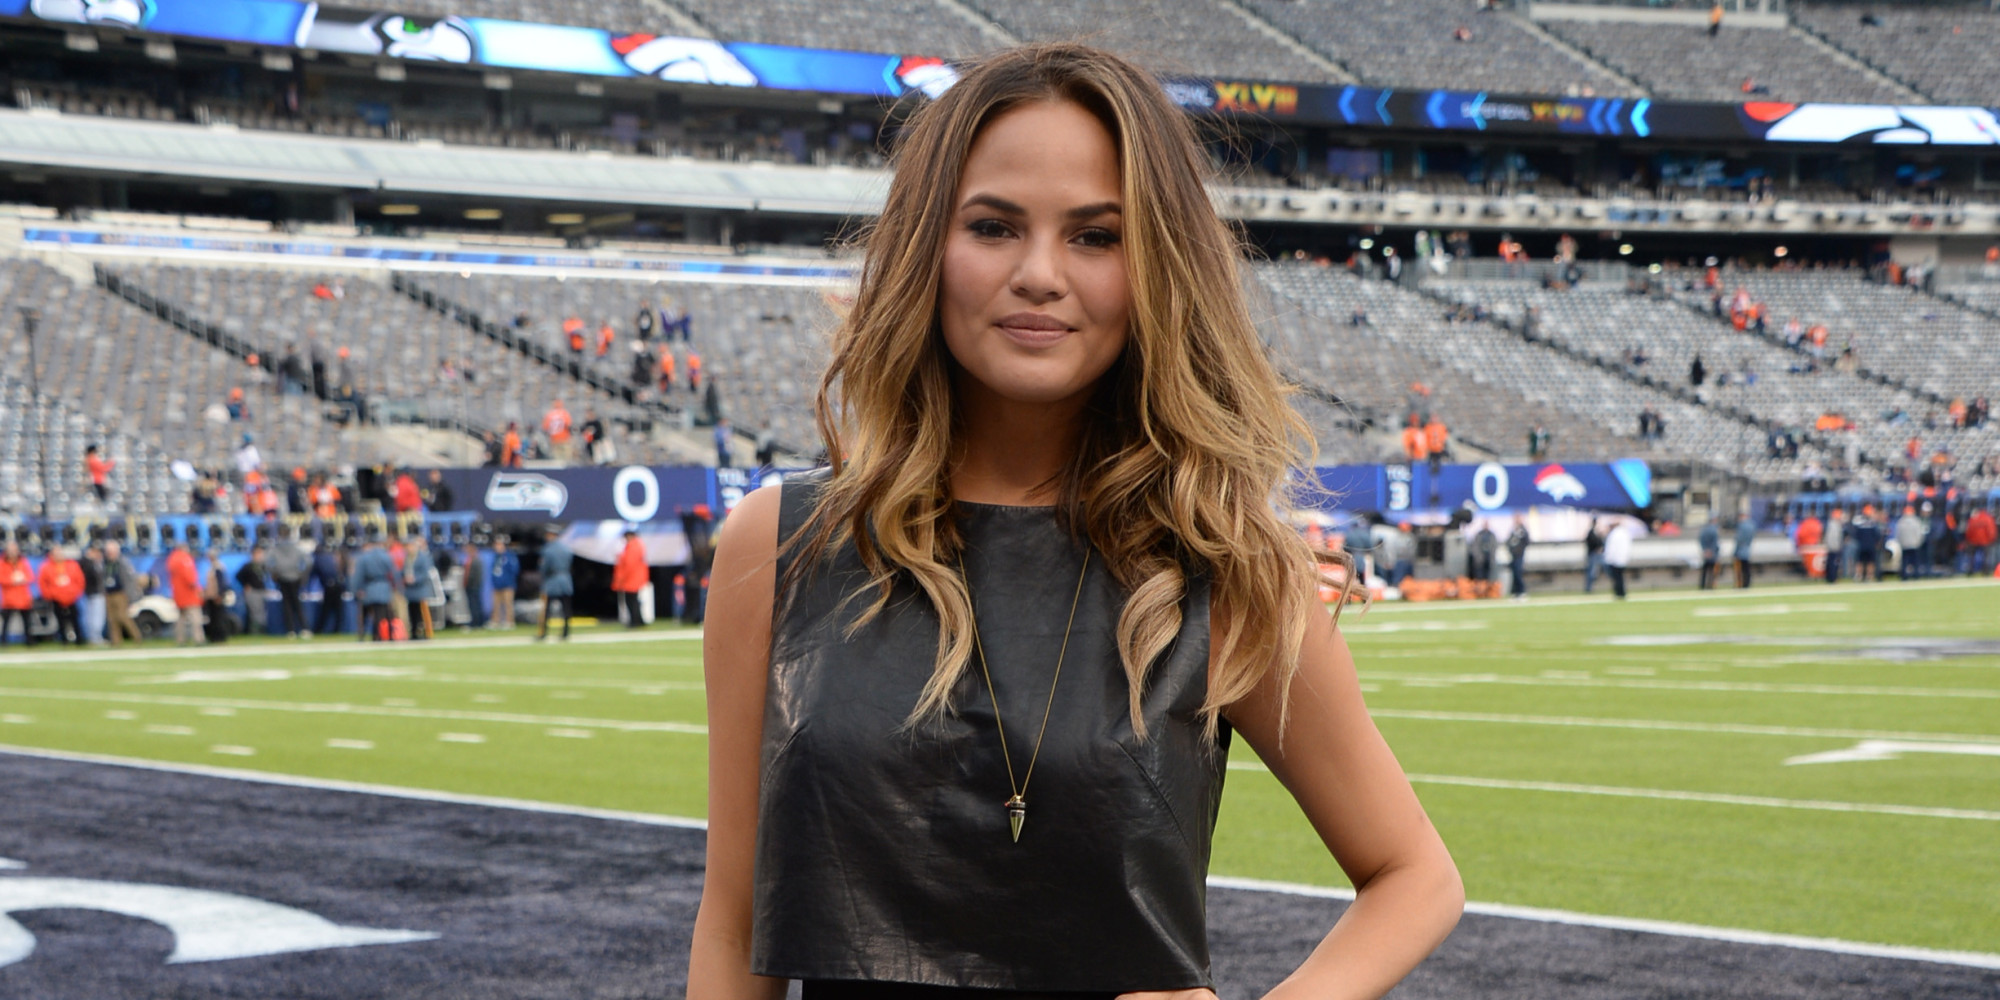 EAST RUTHERFORD, NJ - FEBRUARY 02: Model Chrissy Teigen attends the Pepsi Super Bowl XLVIII Pregame Show at MetLife Stadium on February 2, 2014 in East Rutherford, New Jersey. (Photo by Theo Wargo/FilmMagic)